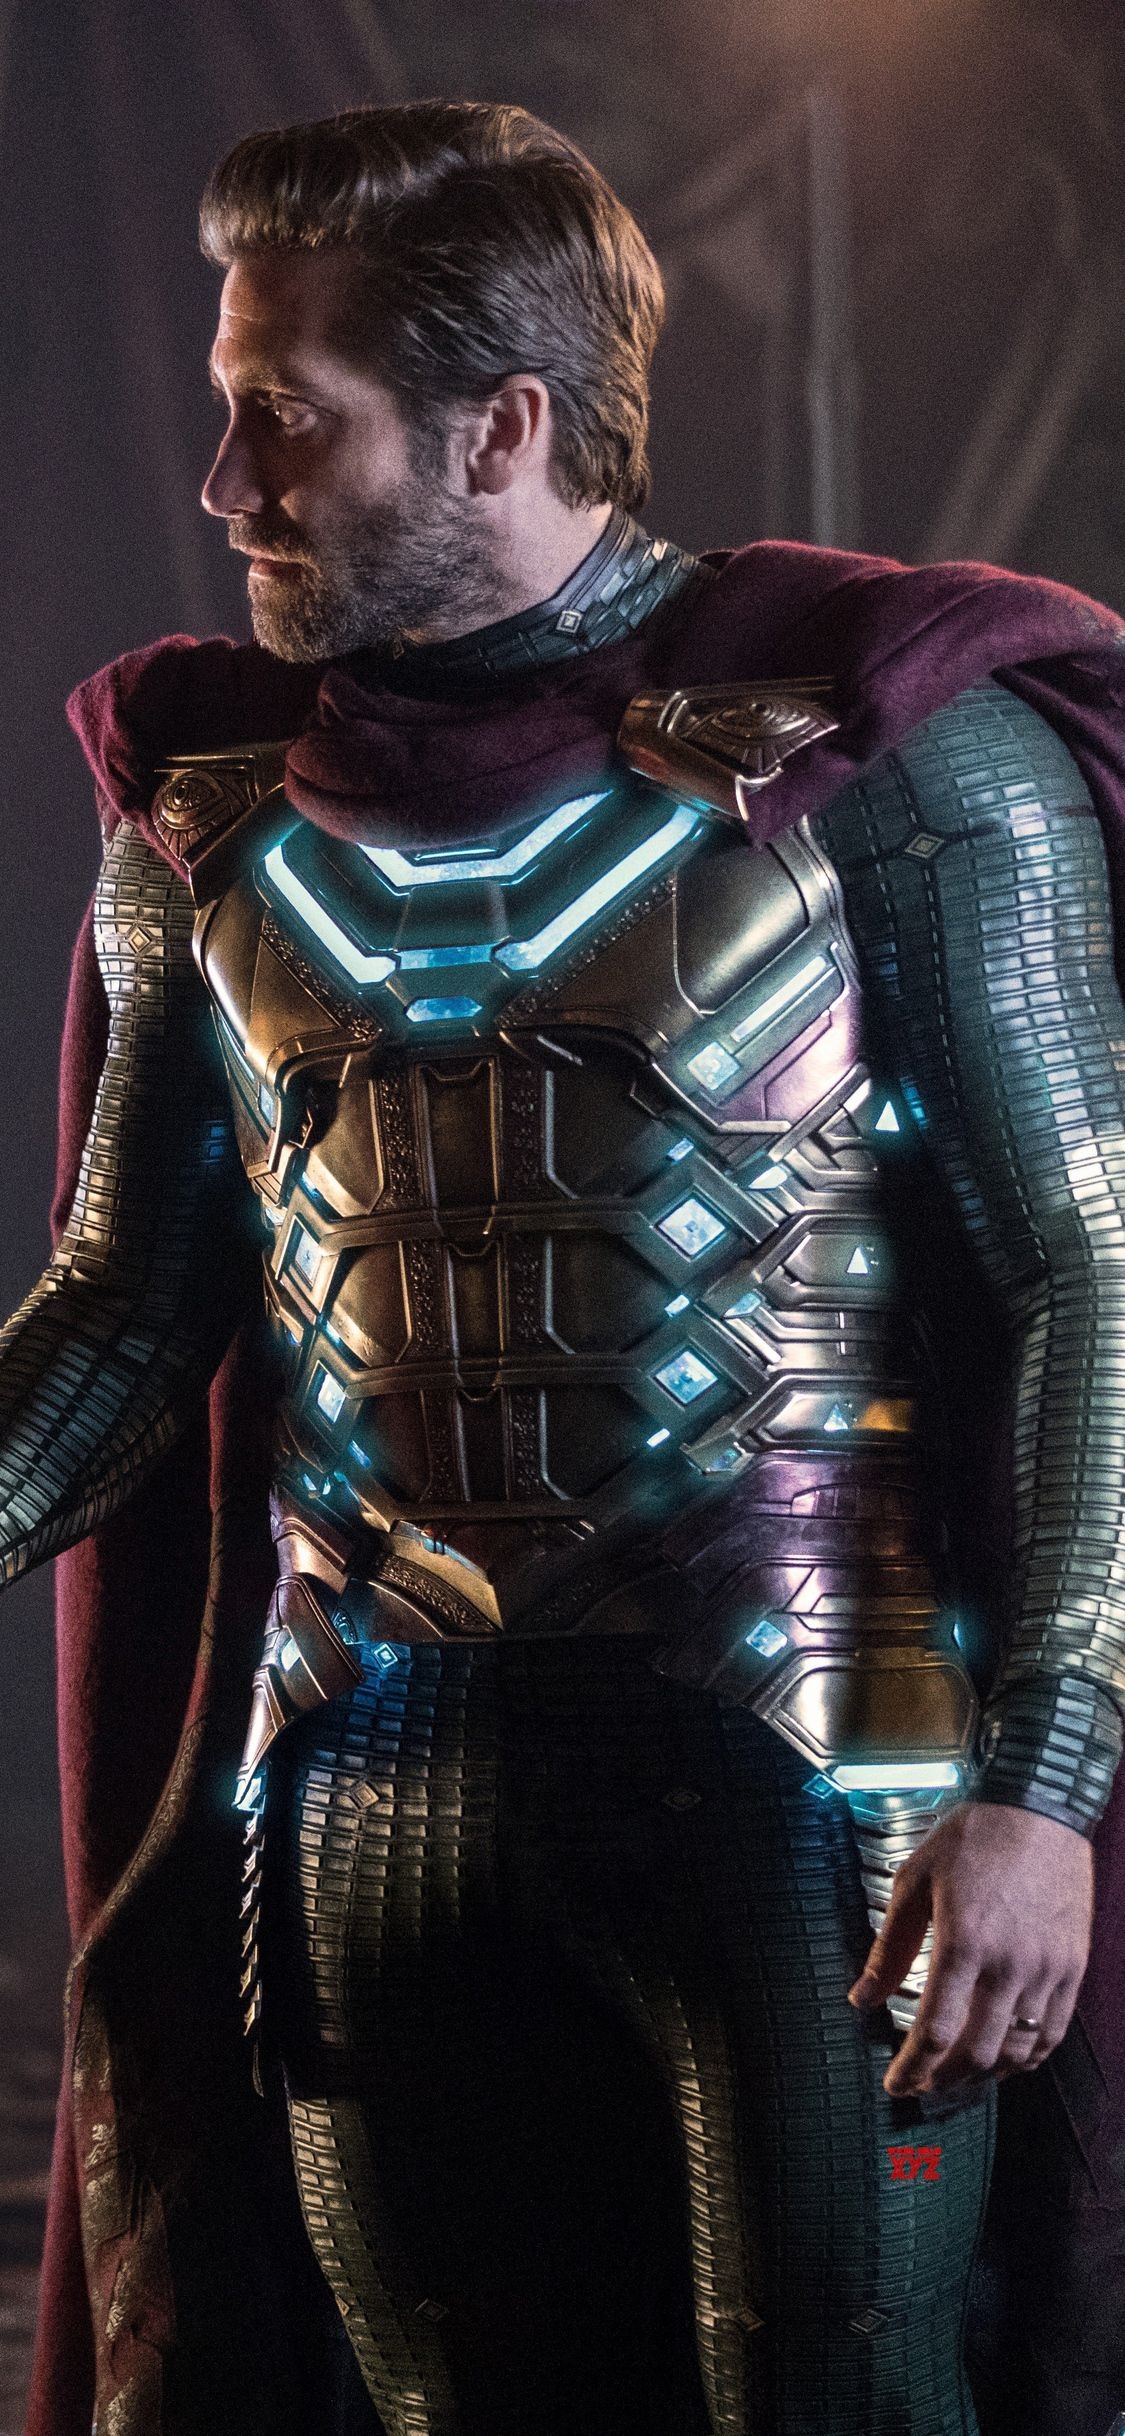 Spider-Man: Far From Home, Mysterio and Spiderman, iPhone wallpapers, 1130x2440 HD Handy